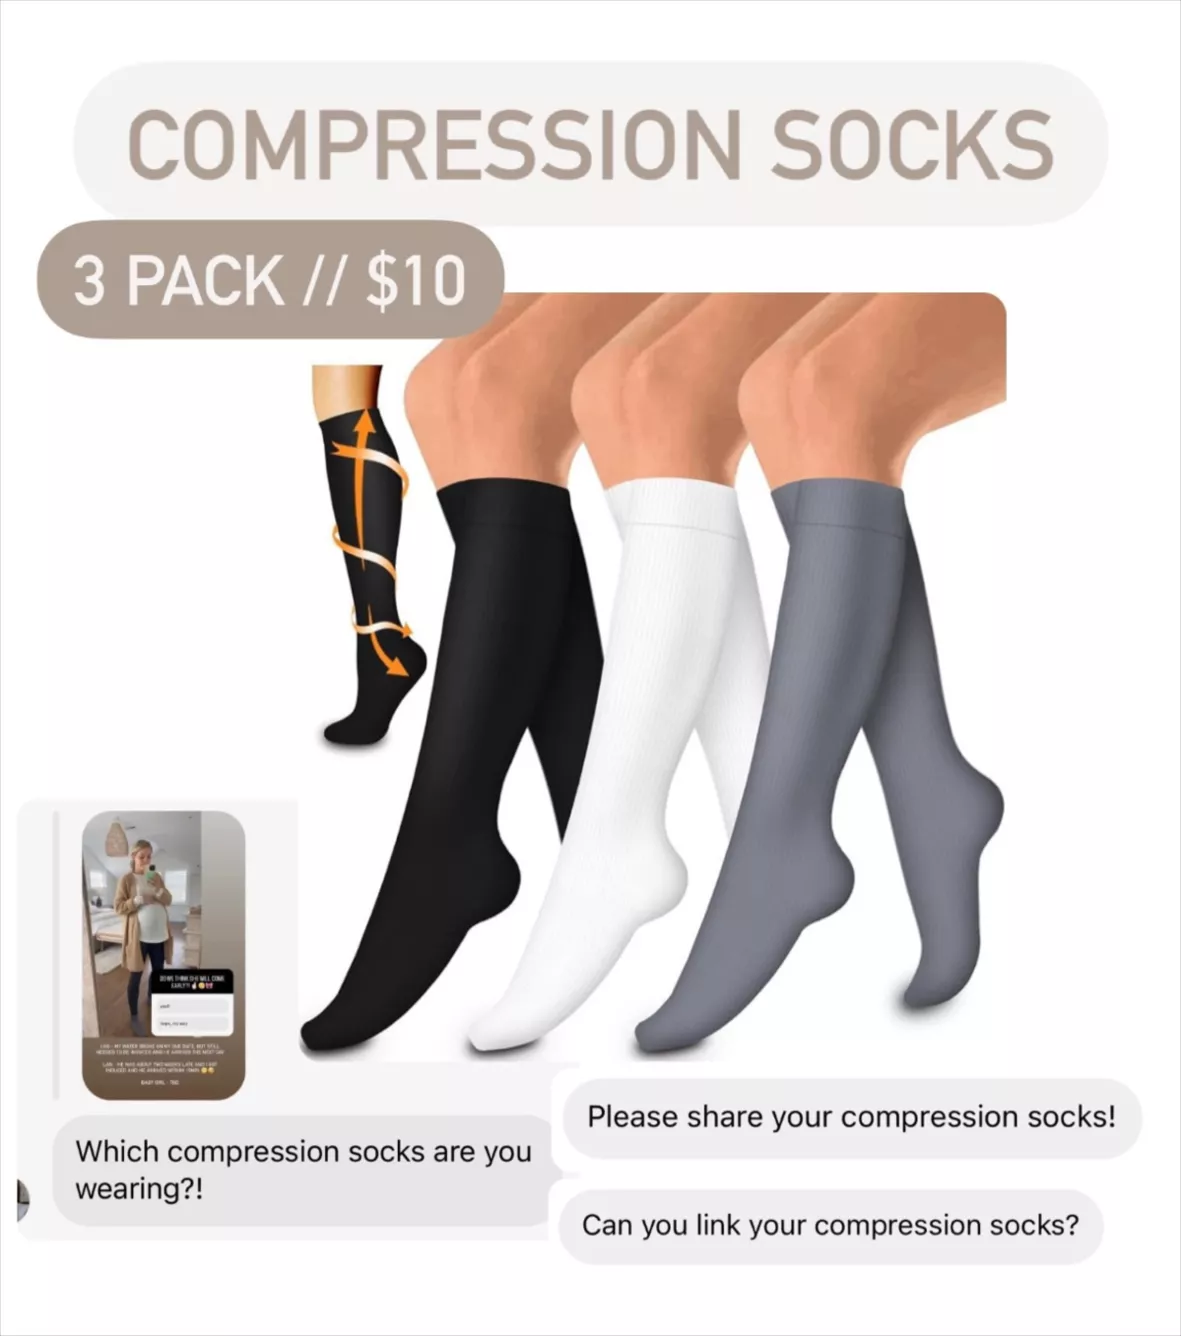 FITLEGS Everyday LIFE on LinkedIn: #reviewthursday #compressionsocks  #customerreview #satisfiedcustomer…